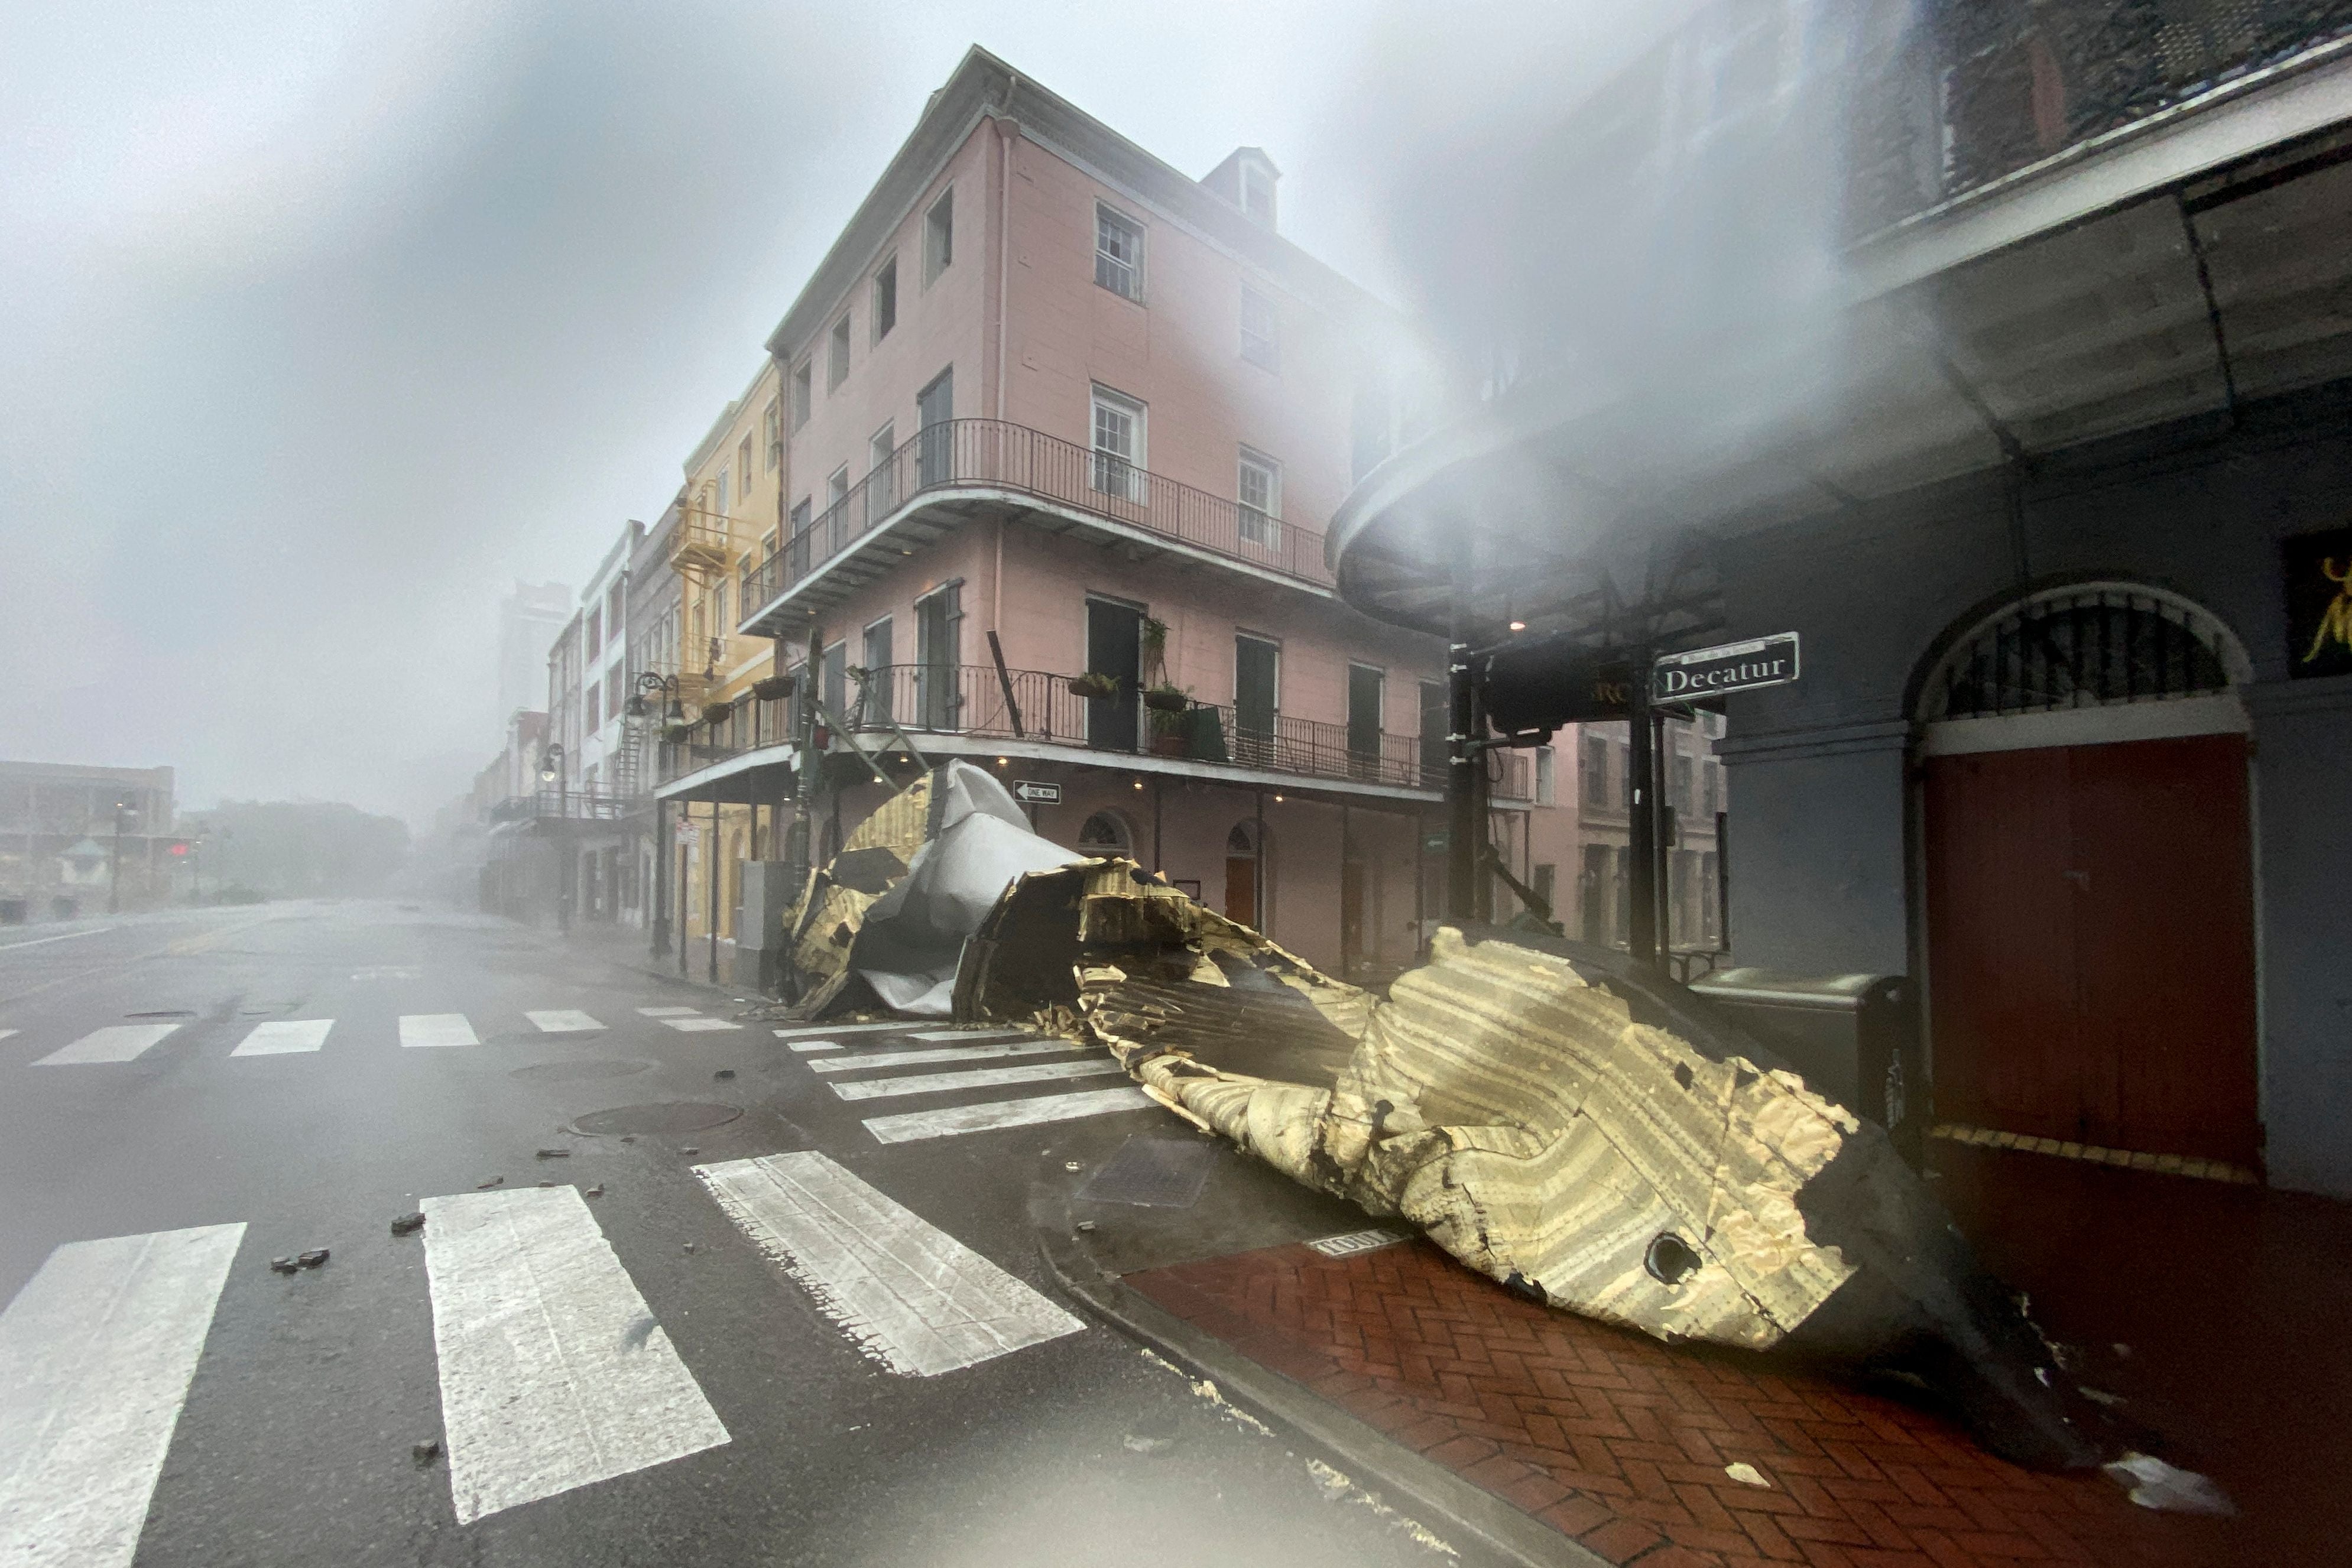 A section of a building’s roof is seen after being blown off during rain and winds in the French Quarter of New Orleans after Hurricane Ida made a landfall